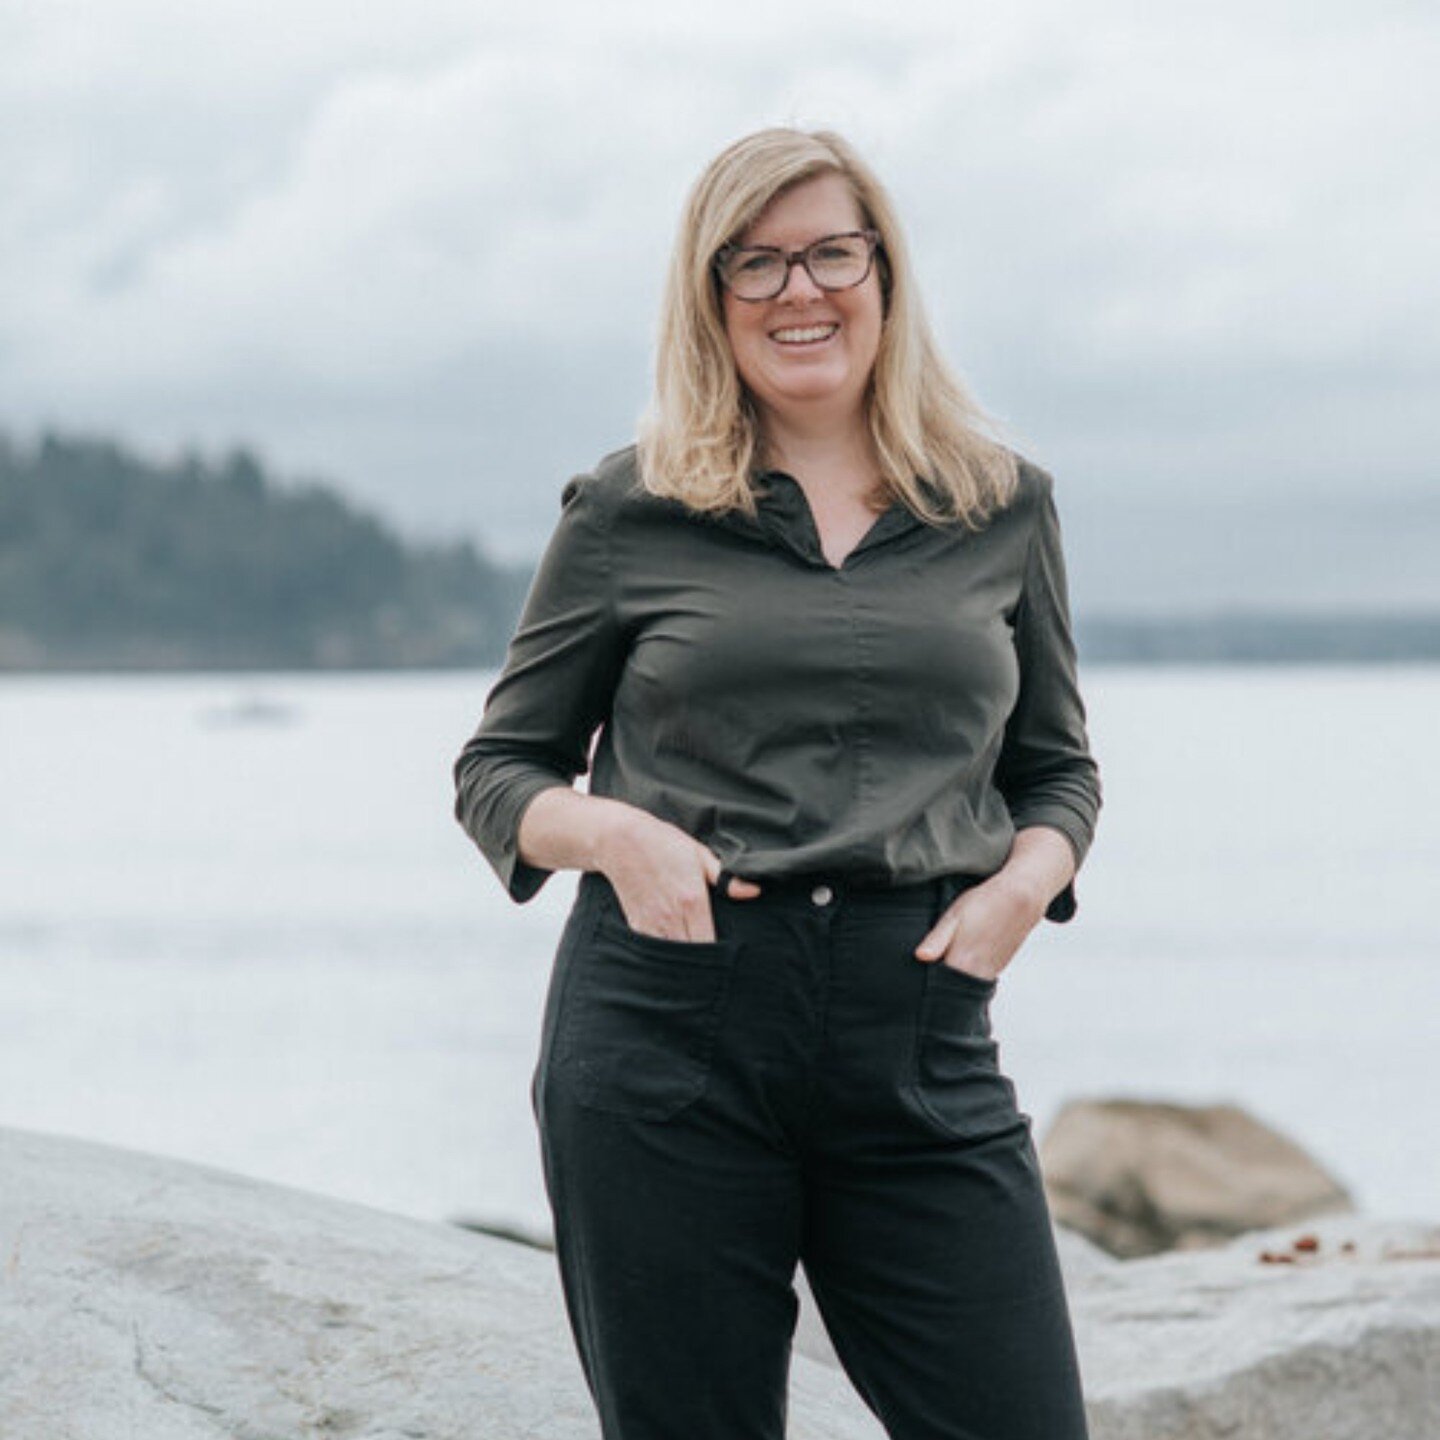 Jennifer Jellis is a Squamish Mom, Massage Therapist, Acupuncturist, and Post Partum Doula. ⁠
⁠
In one visit with Jennifer, you could receive a variety of treatments. Her focus is working towards healing the whole person through various modalities de